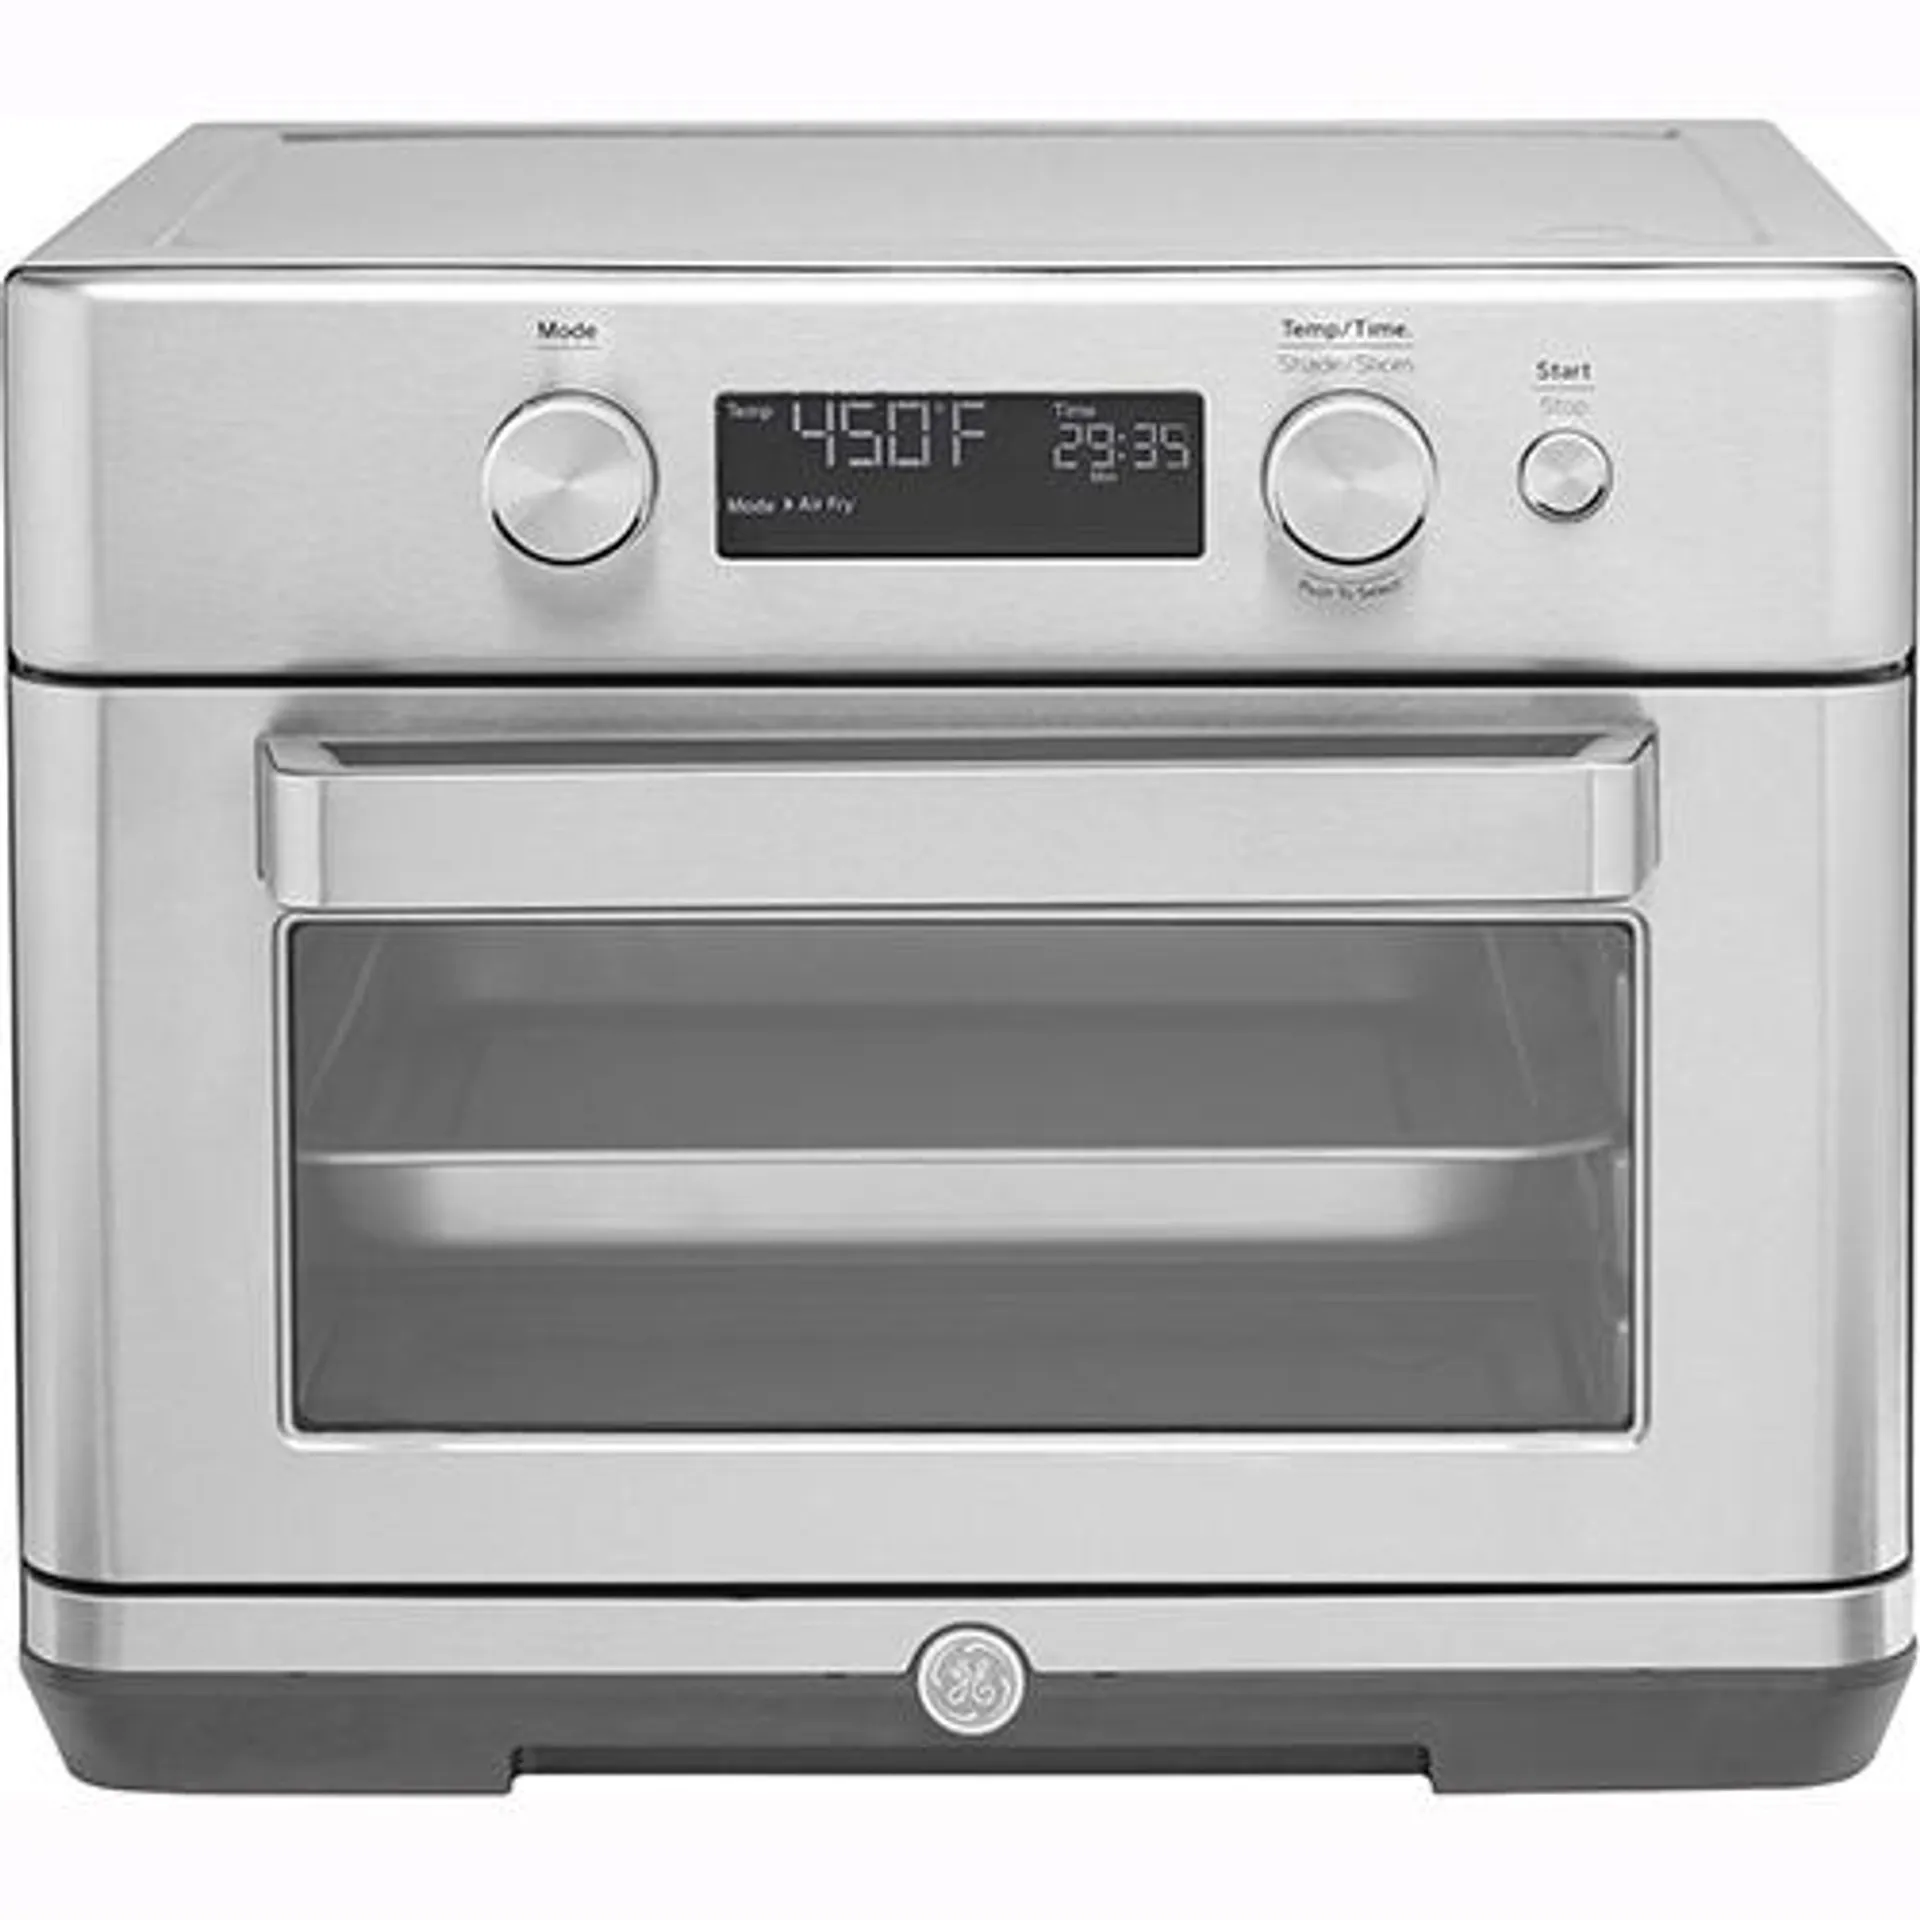 8-In-1 Digital Air Fry Toaster Oven - Stainless Steel